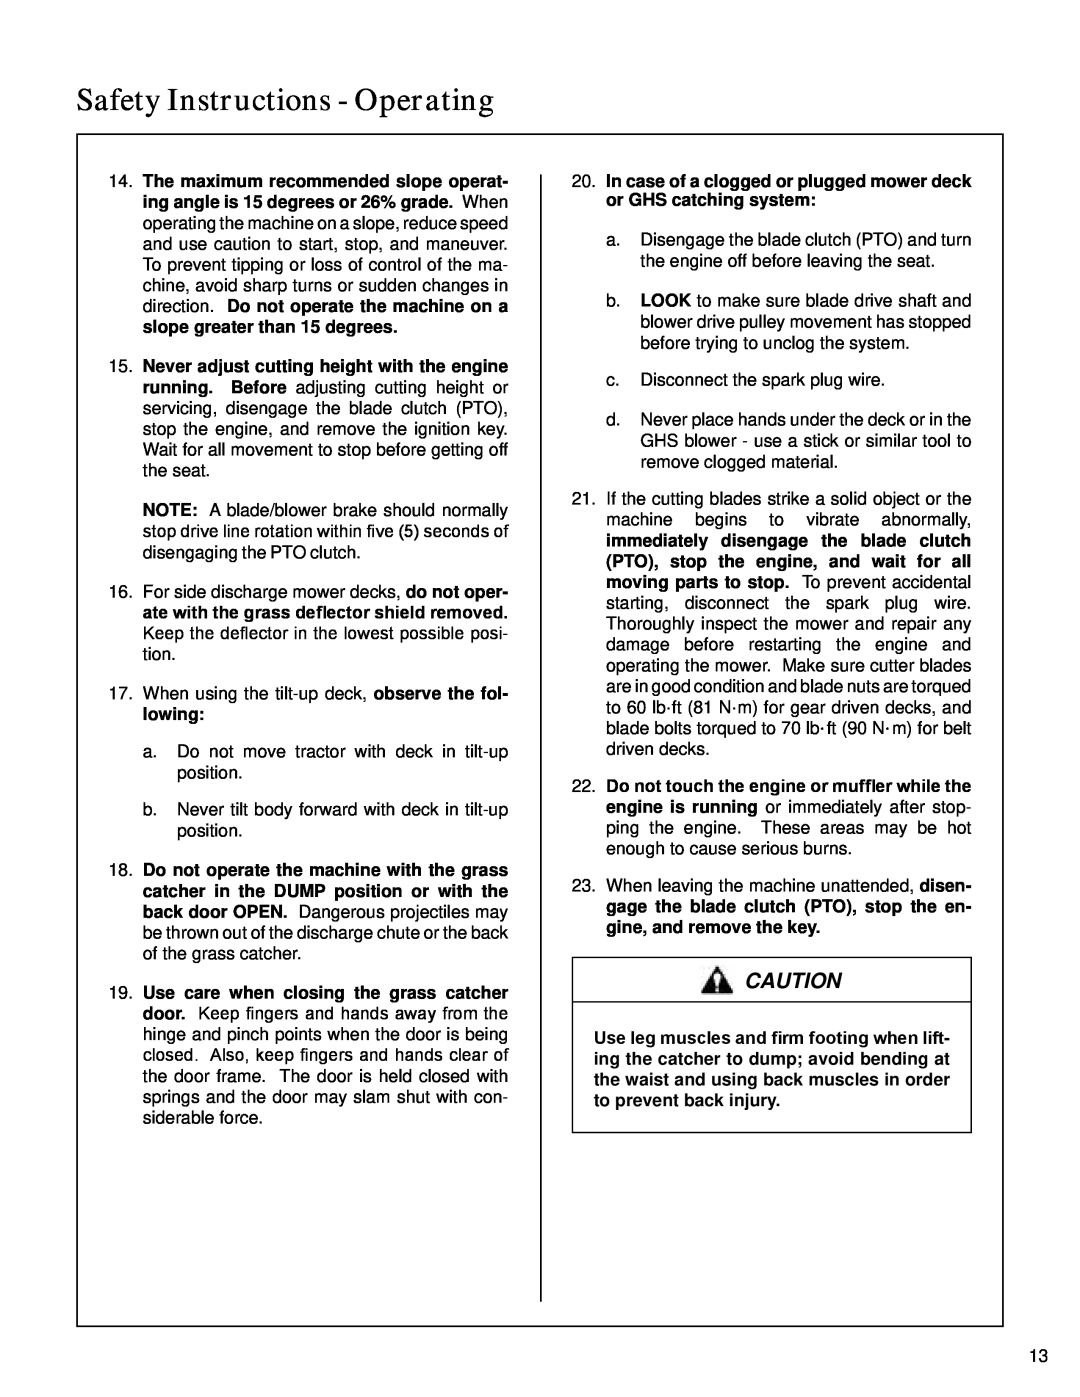 Walker S14 manual Safety Instructions - Operating, a.Do not move tractor with deck in tilt-upposition 